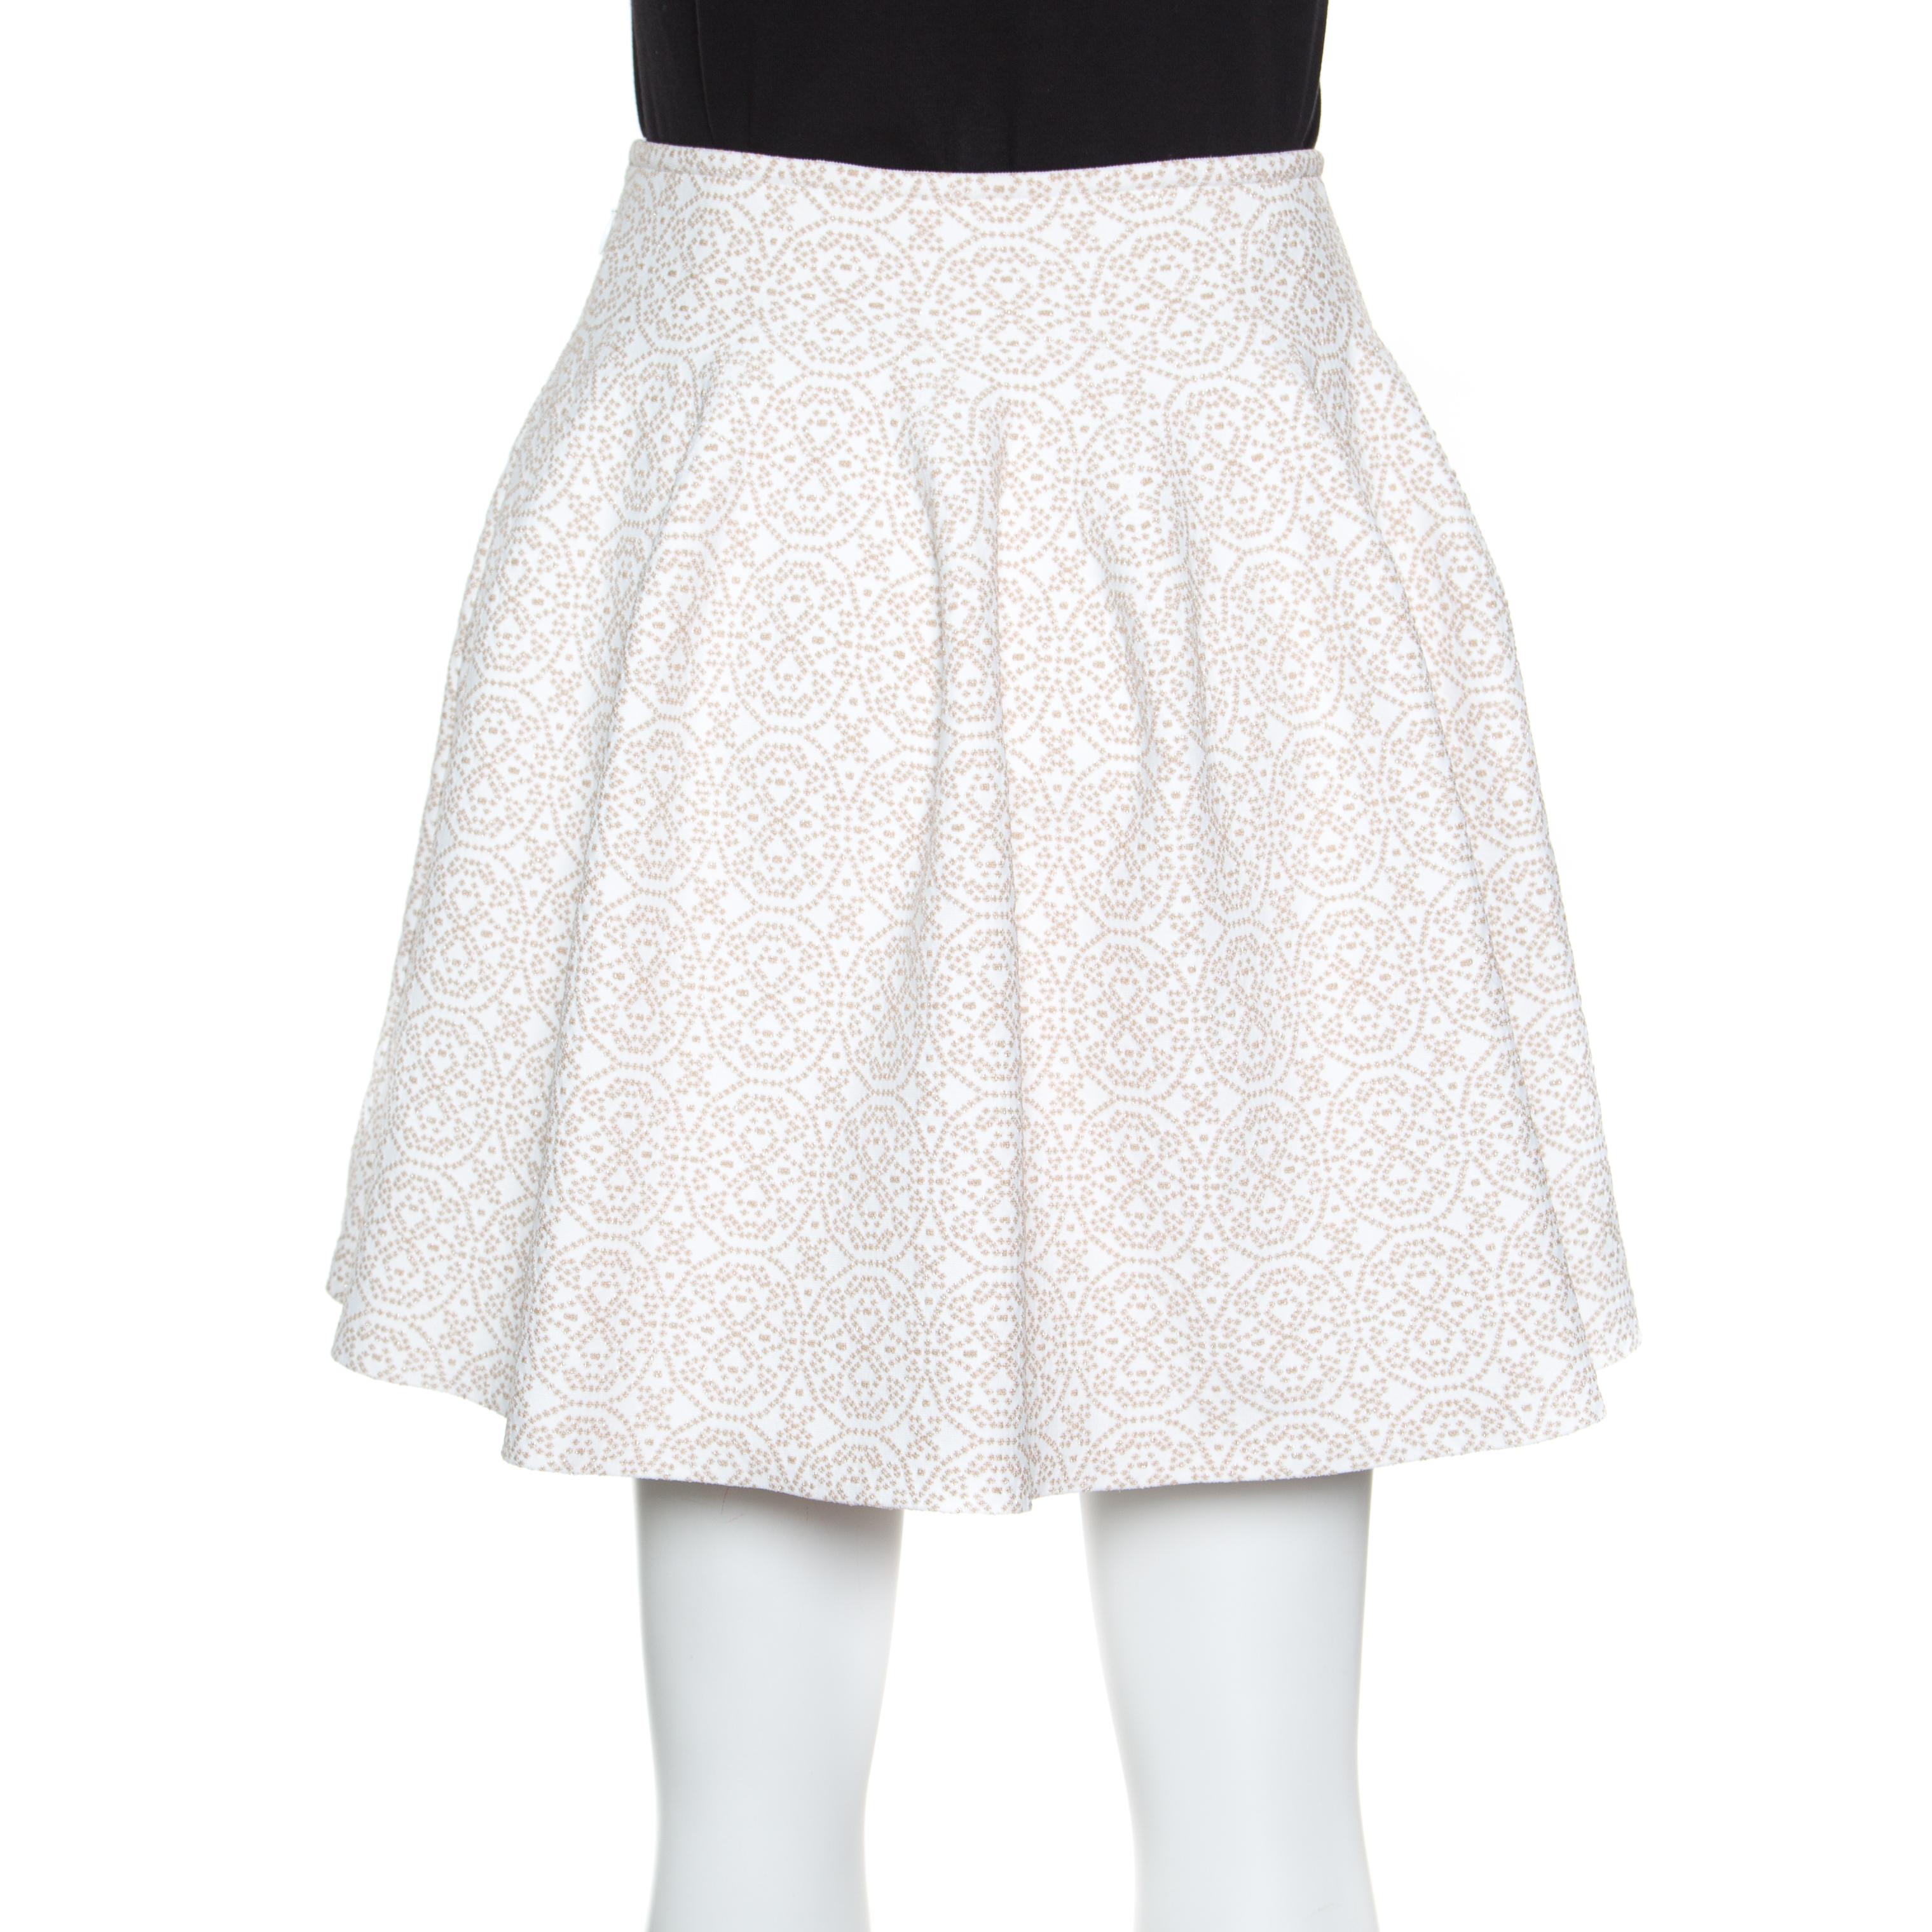 How stylish is this mini skirt from Alaia! Tailored from quality materials, the skirt carries a beige shade with gorgeous jacquard patterns all over. You can team it with a simple top and sneakers or high heels.

Includes: The Luxury Closet